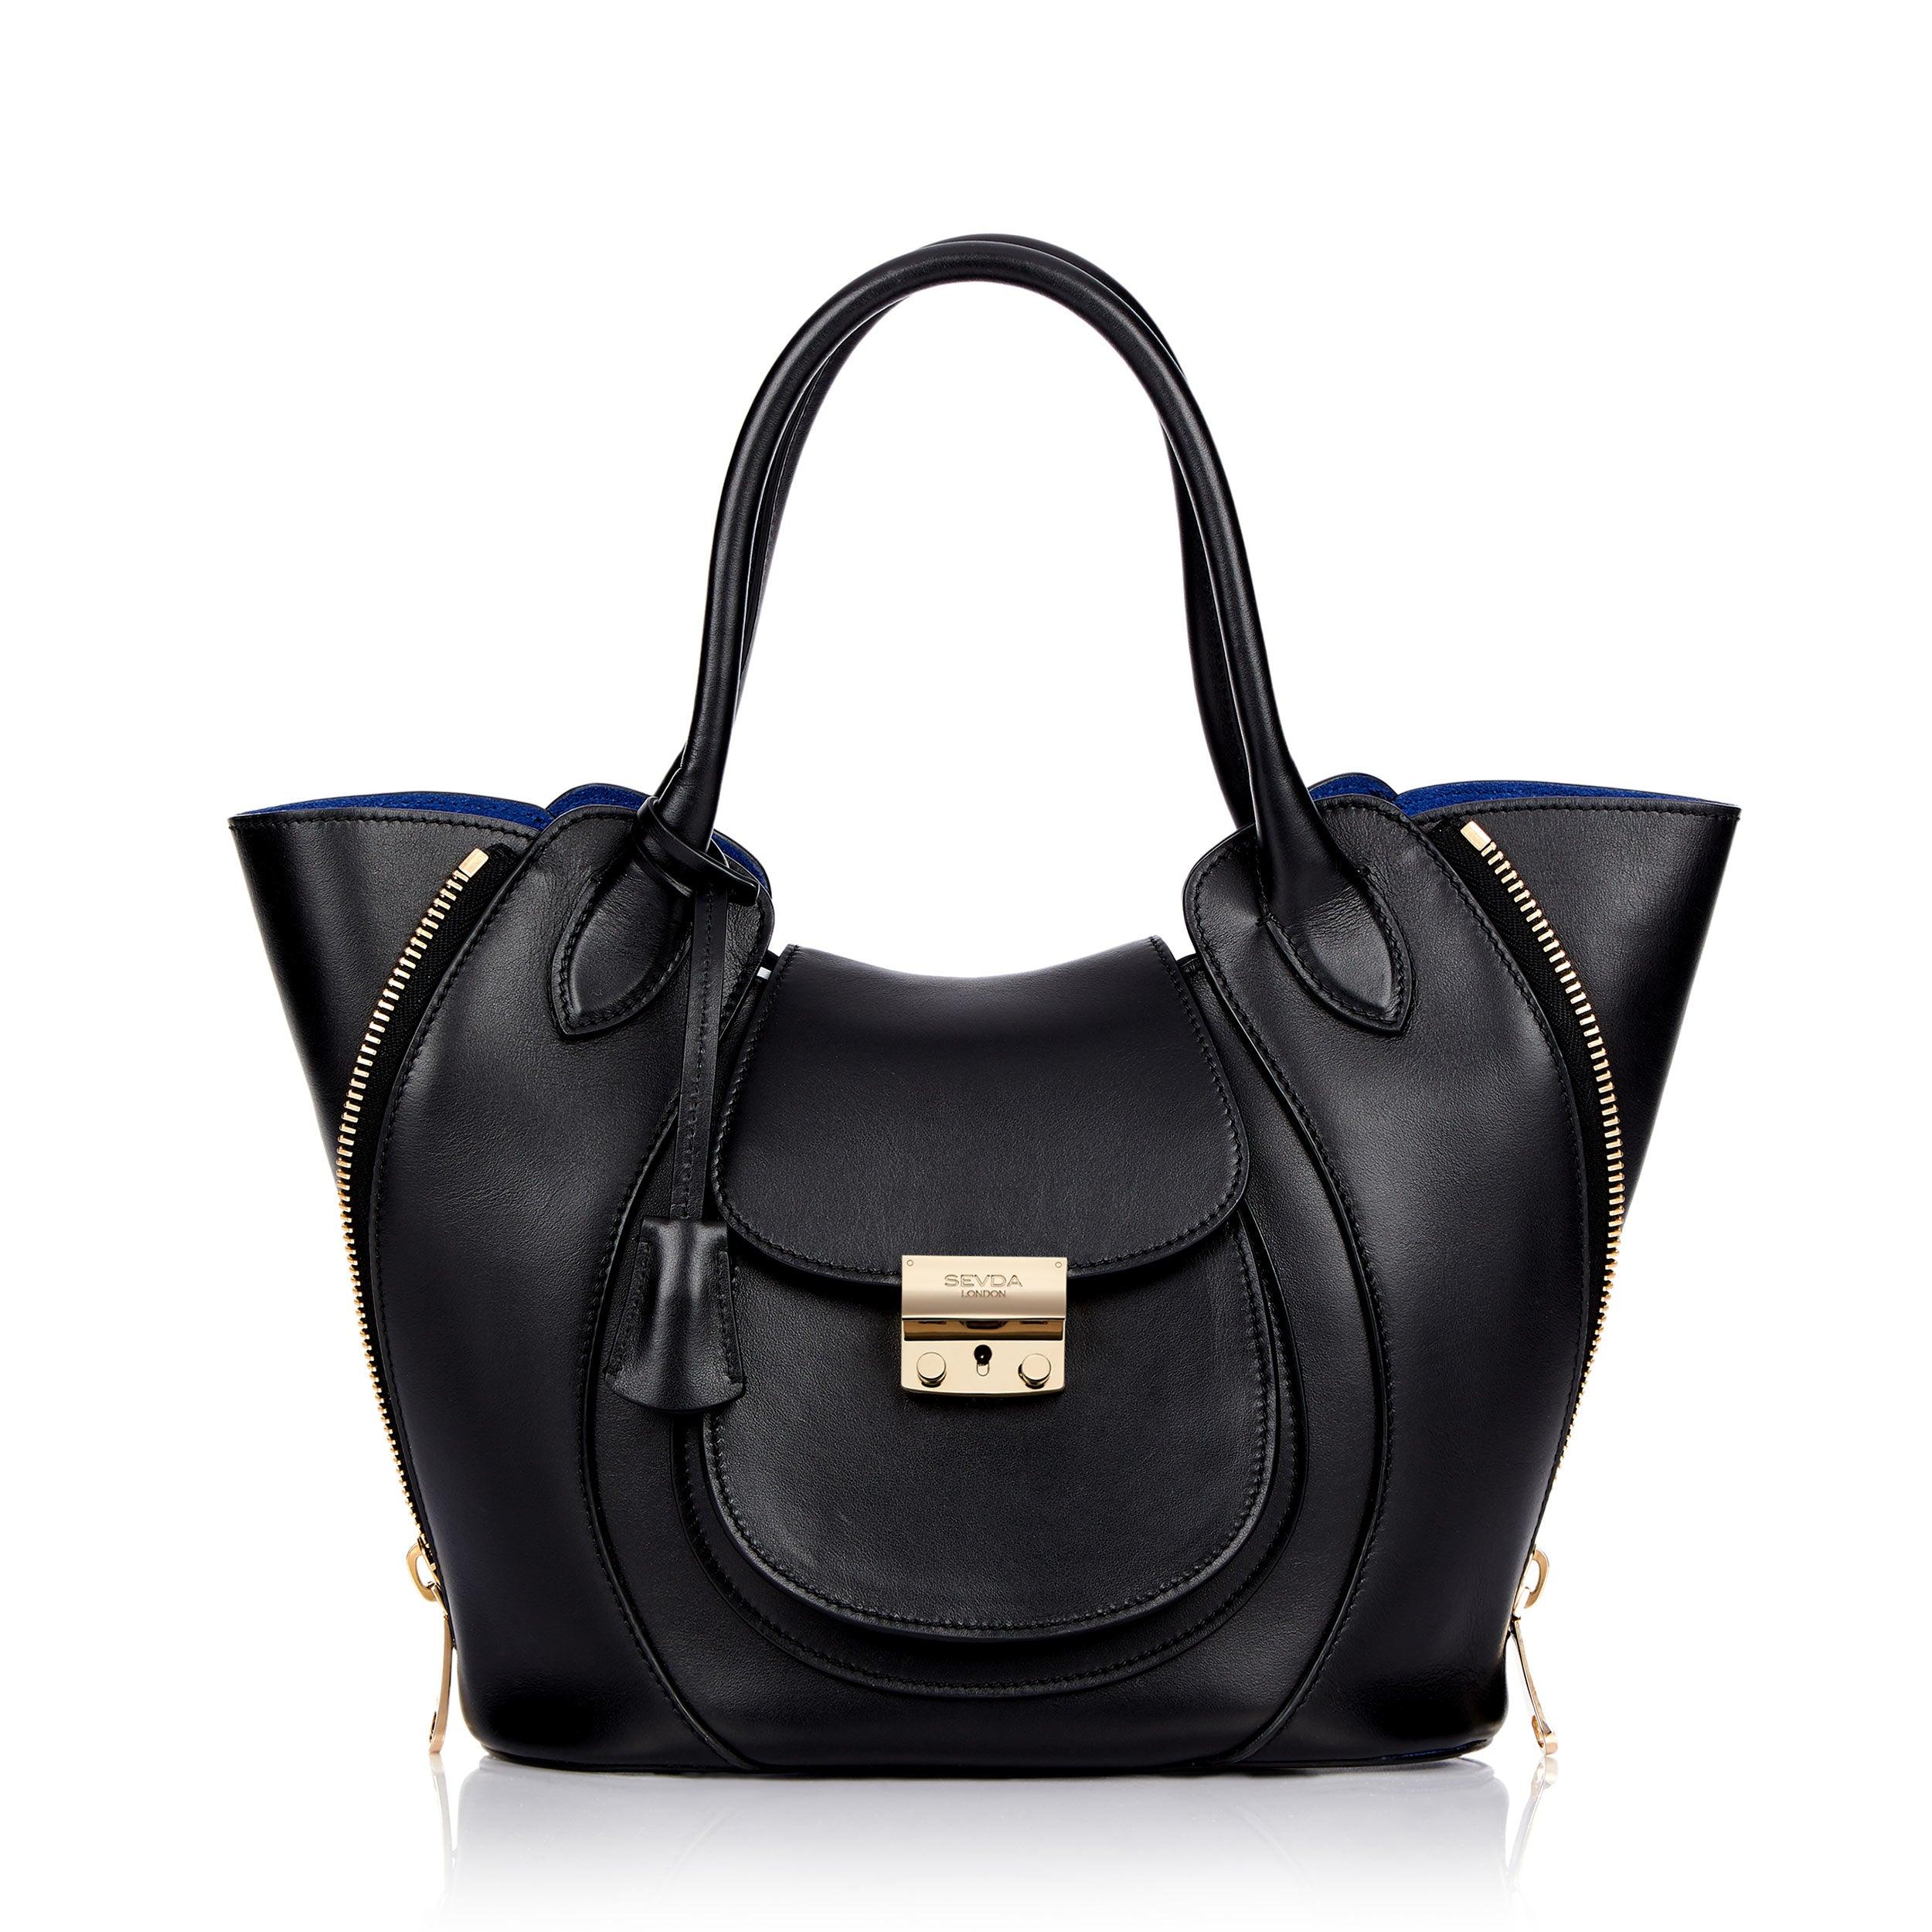 Black Leather Luxury Designer Bag with Blue Suede Lining - Fusion of London's style and Italian craftsmanship.